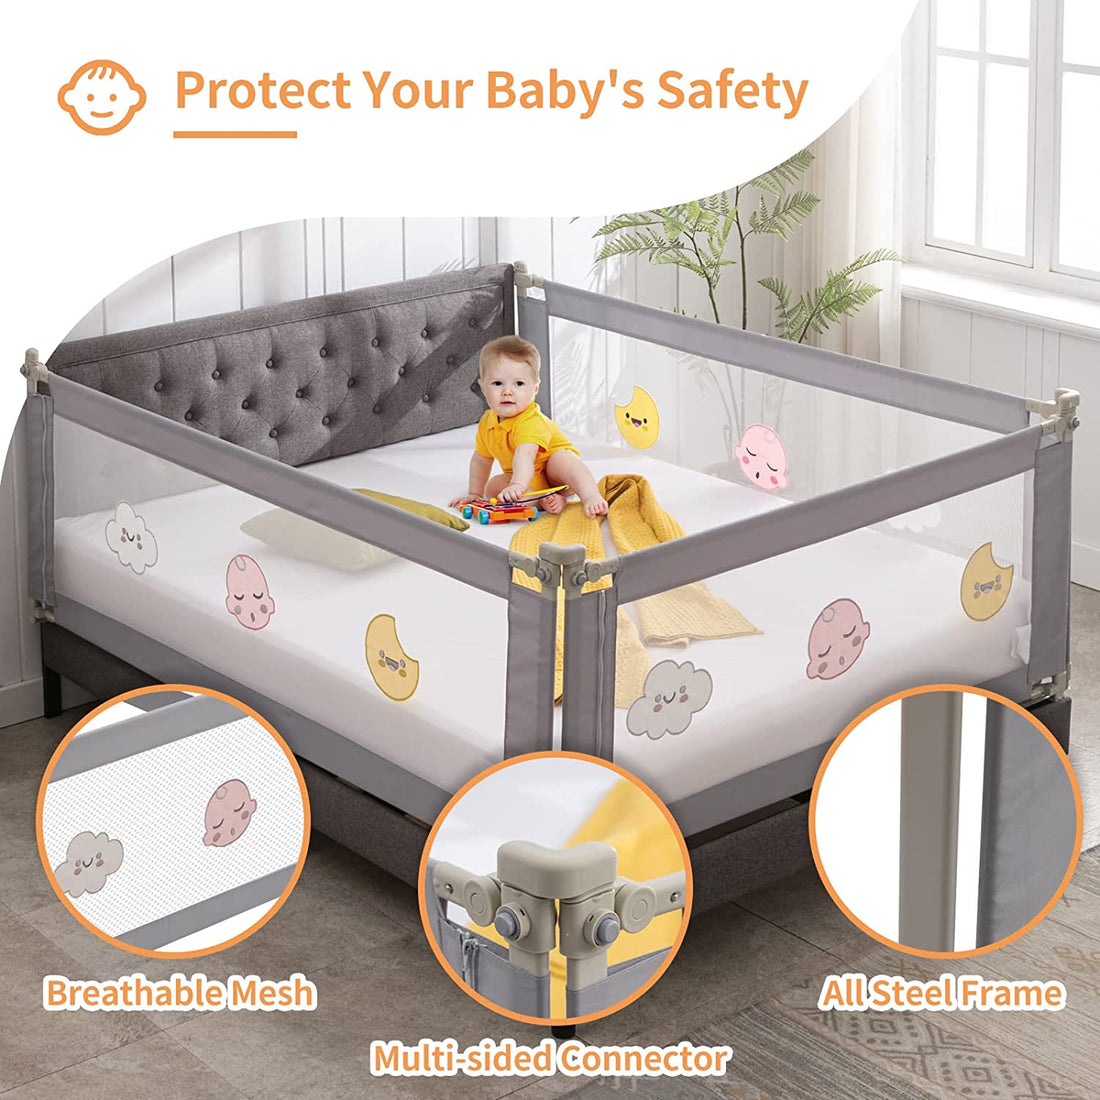 How old can a baby be when using a bed playpen?